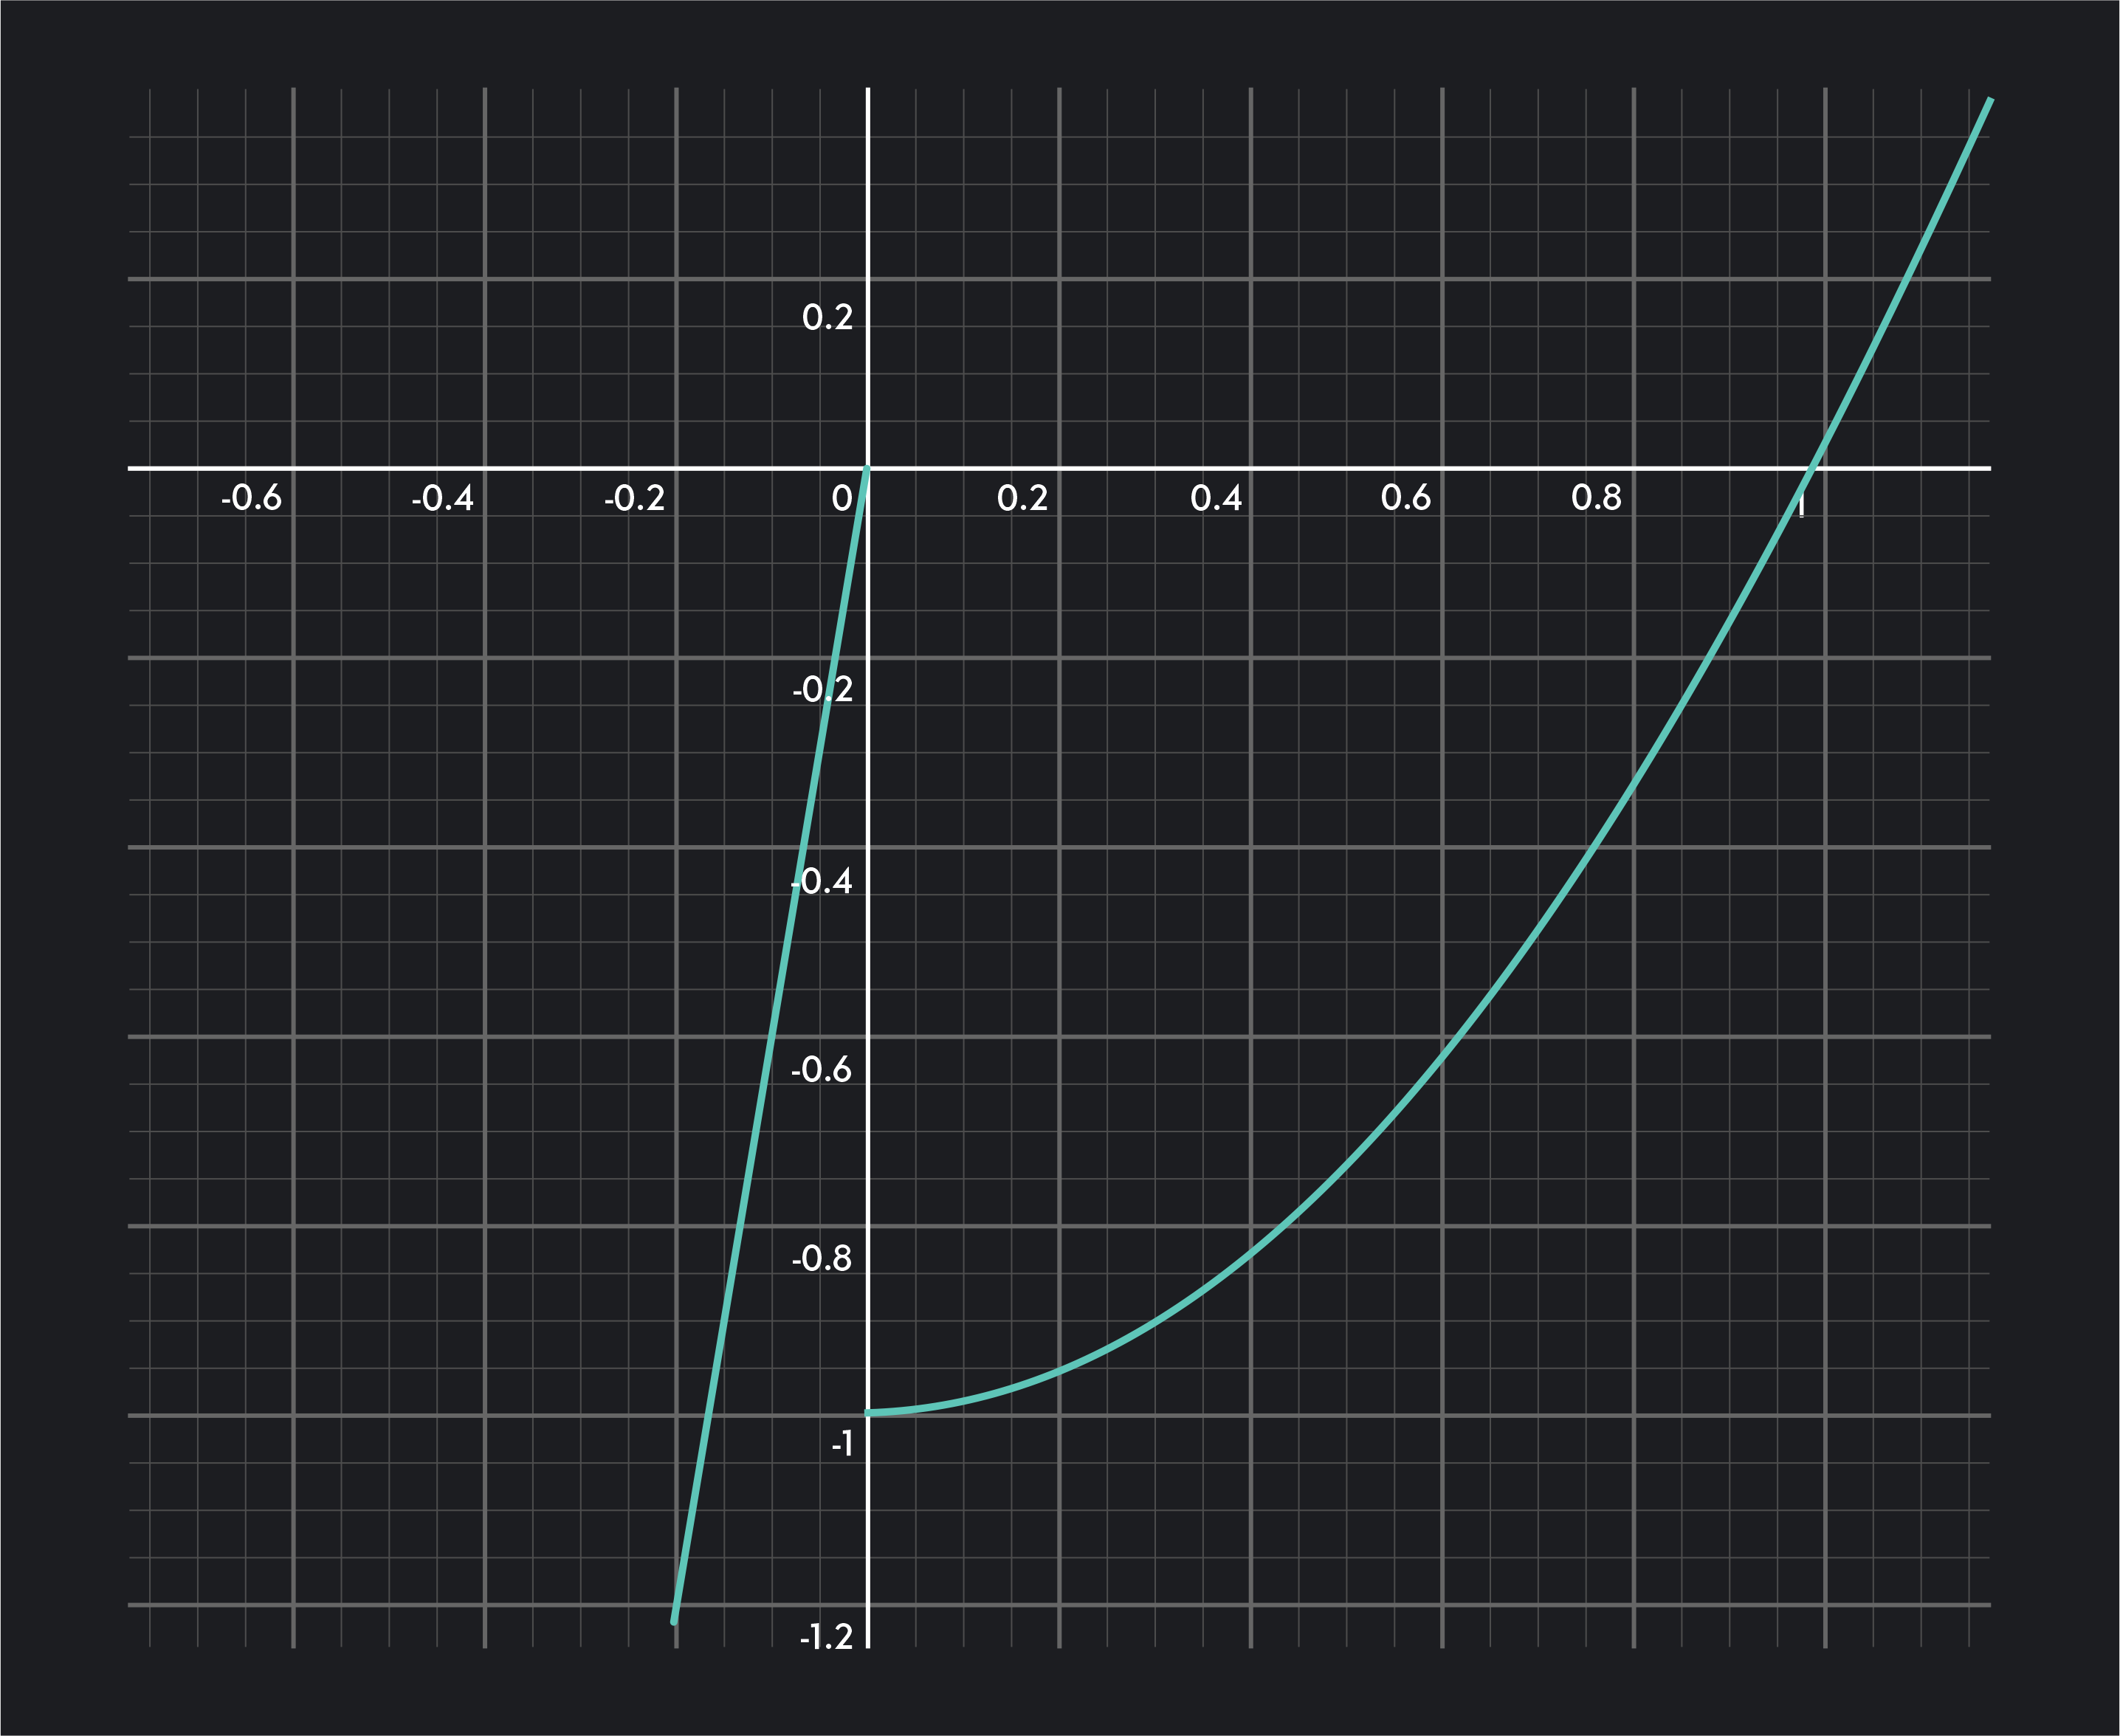 A jump discontinuity, where curve jumps abruptly to another point on the graph